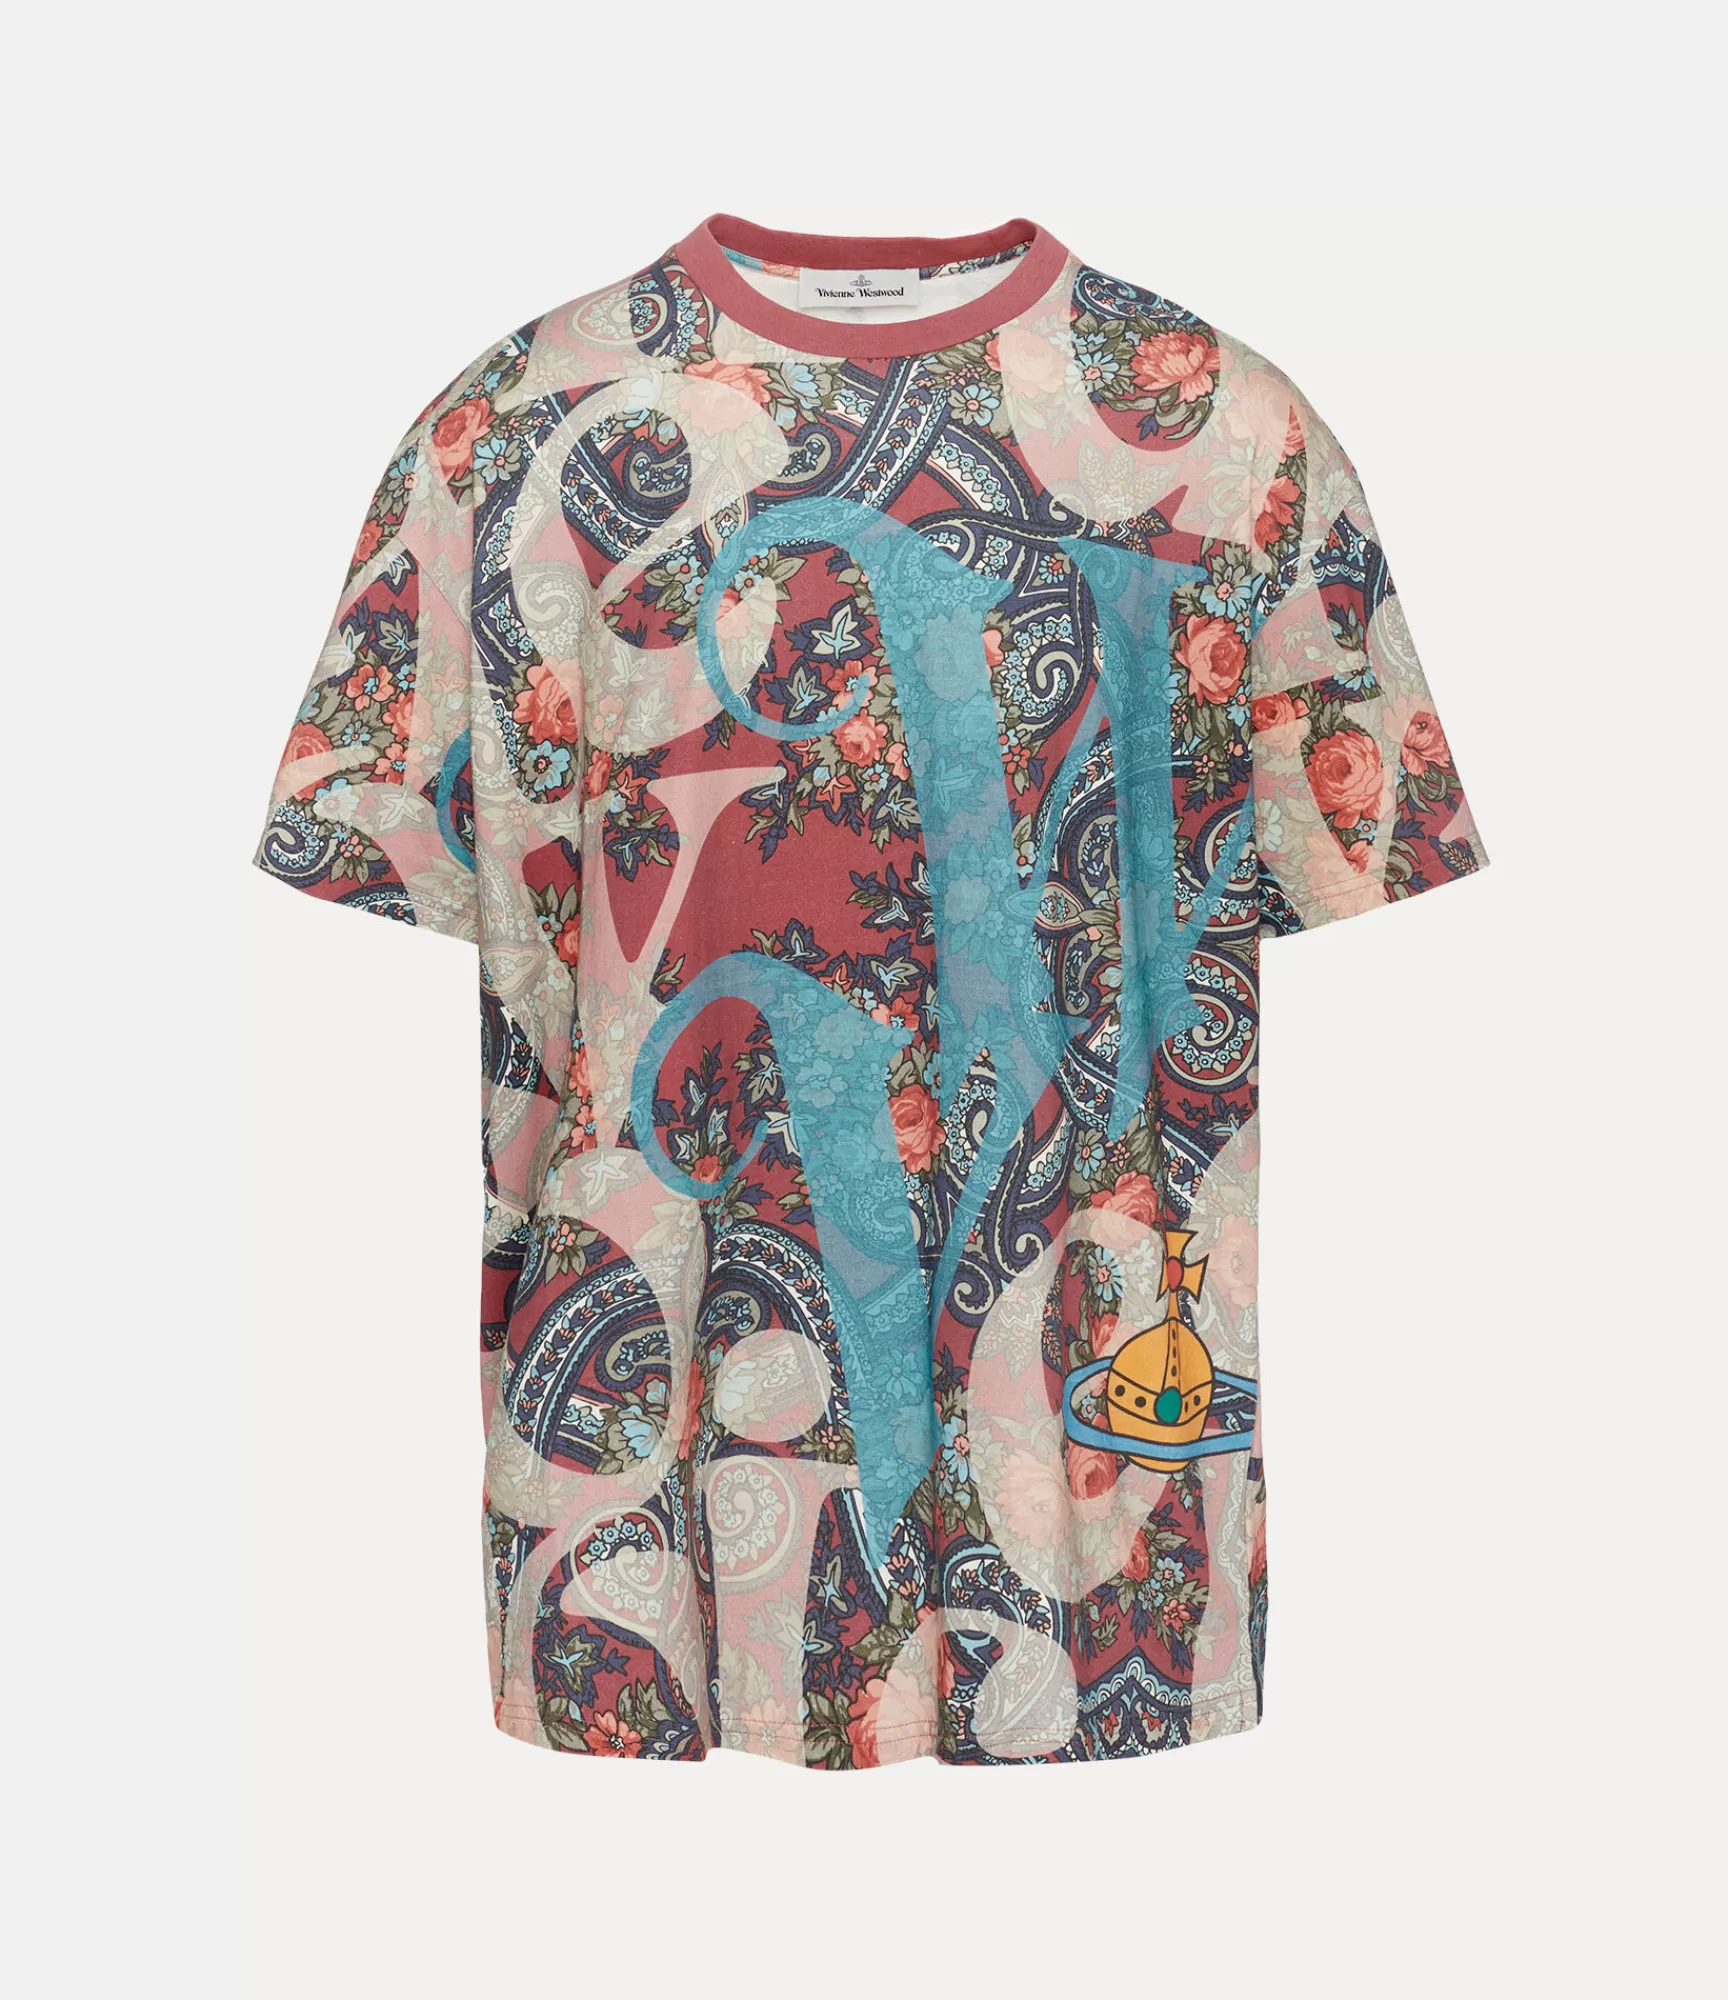 Vivienne Westwood T-Shirts and Polos | Sweatshirts and T-Shirts*Oversized t-shirt Rose Paisley